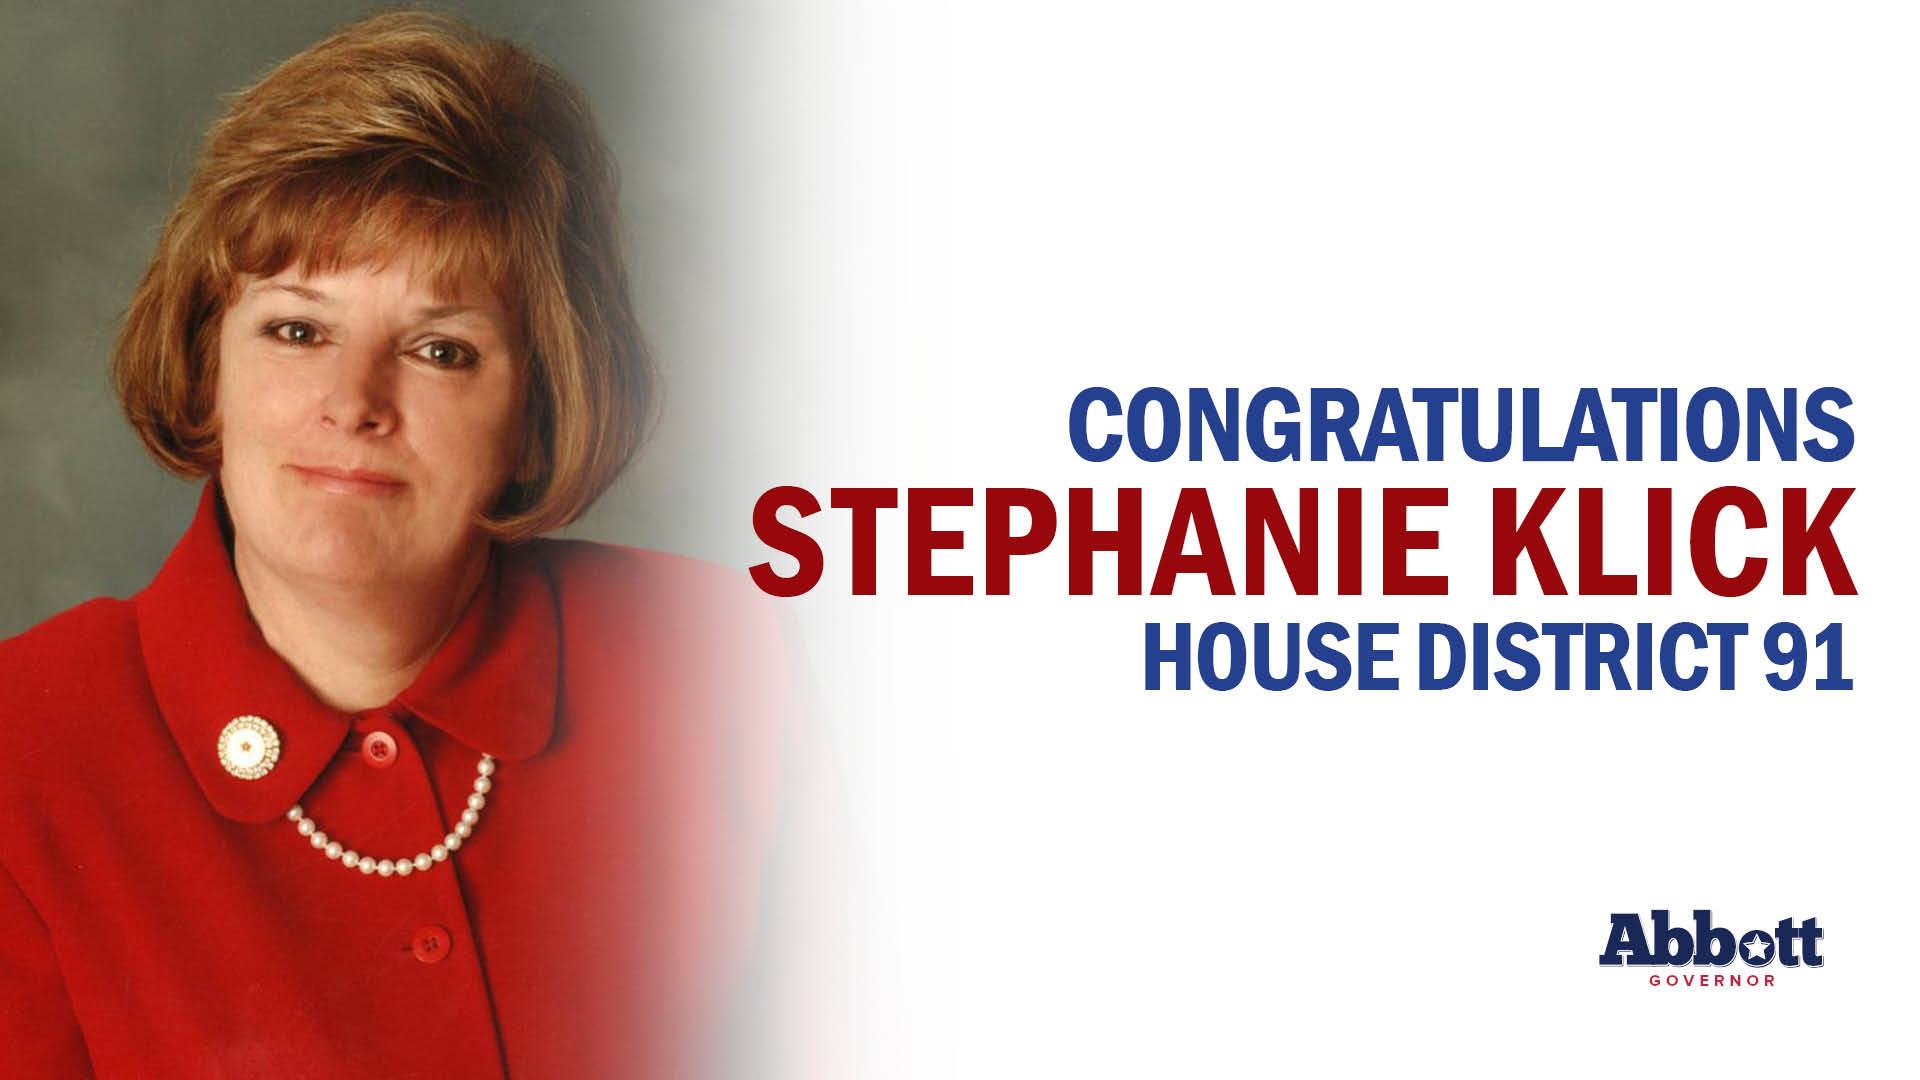 Governor Abbott Lauds Stephanie Klick Re-Election Victory In House District 91